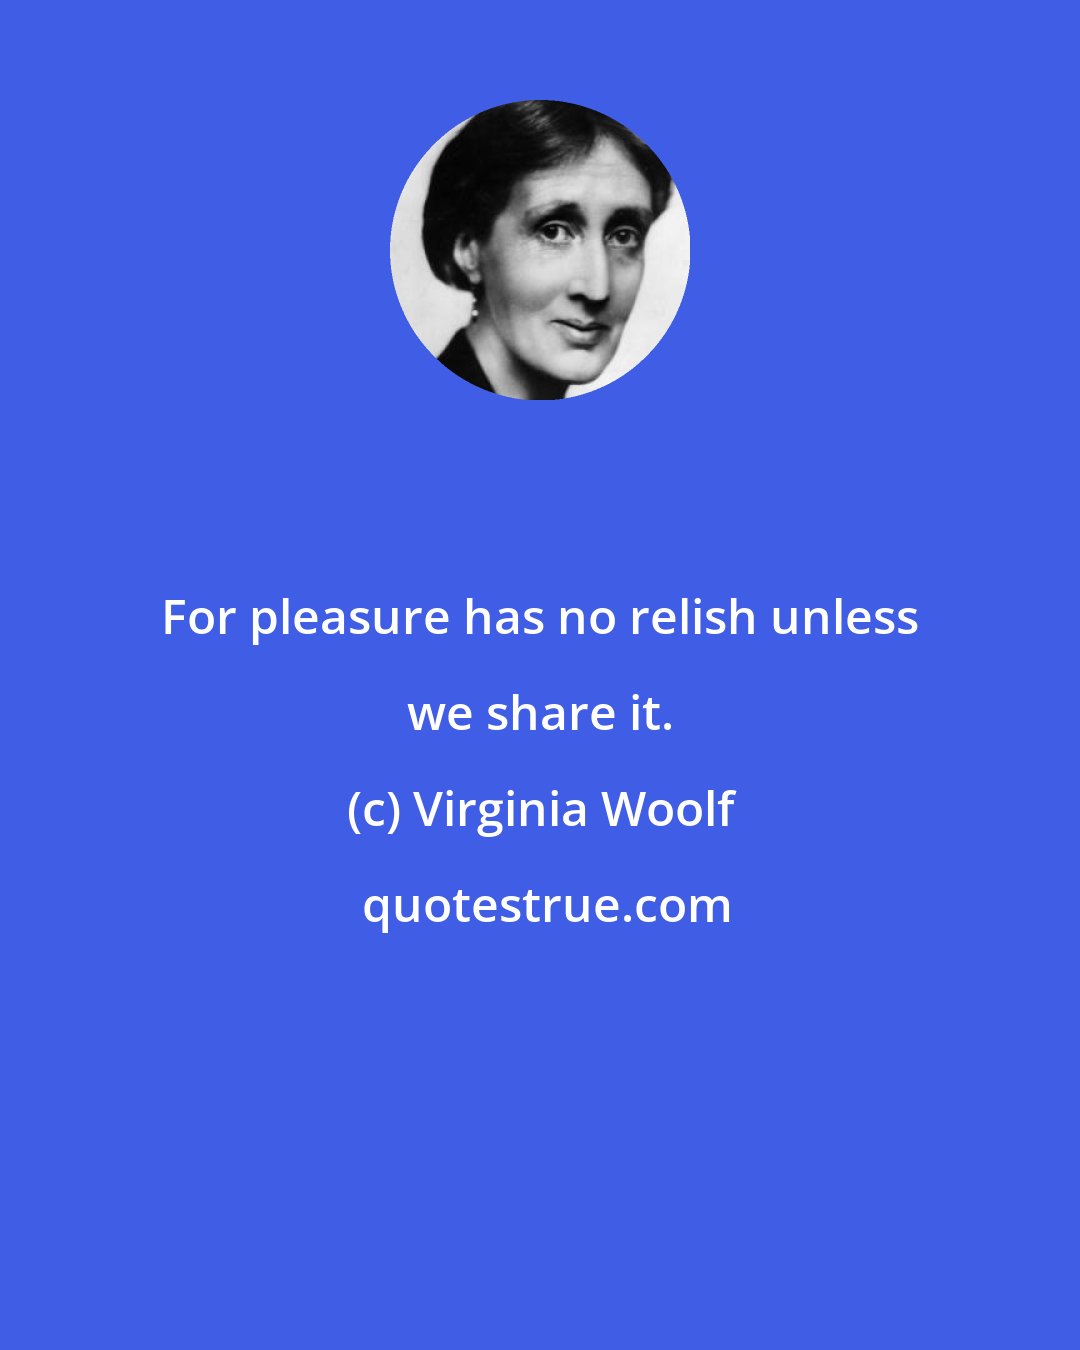 Virginia Woolf: For pleasure has no relish unless we share it.